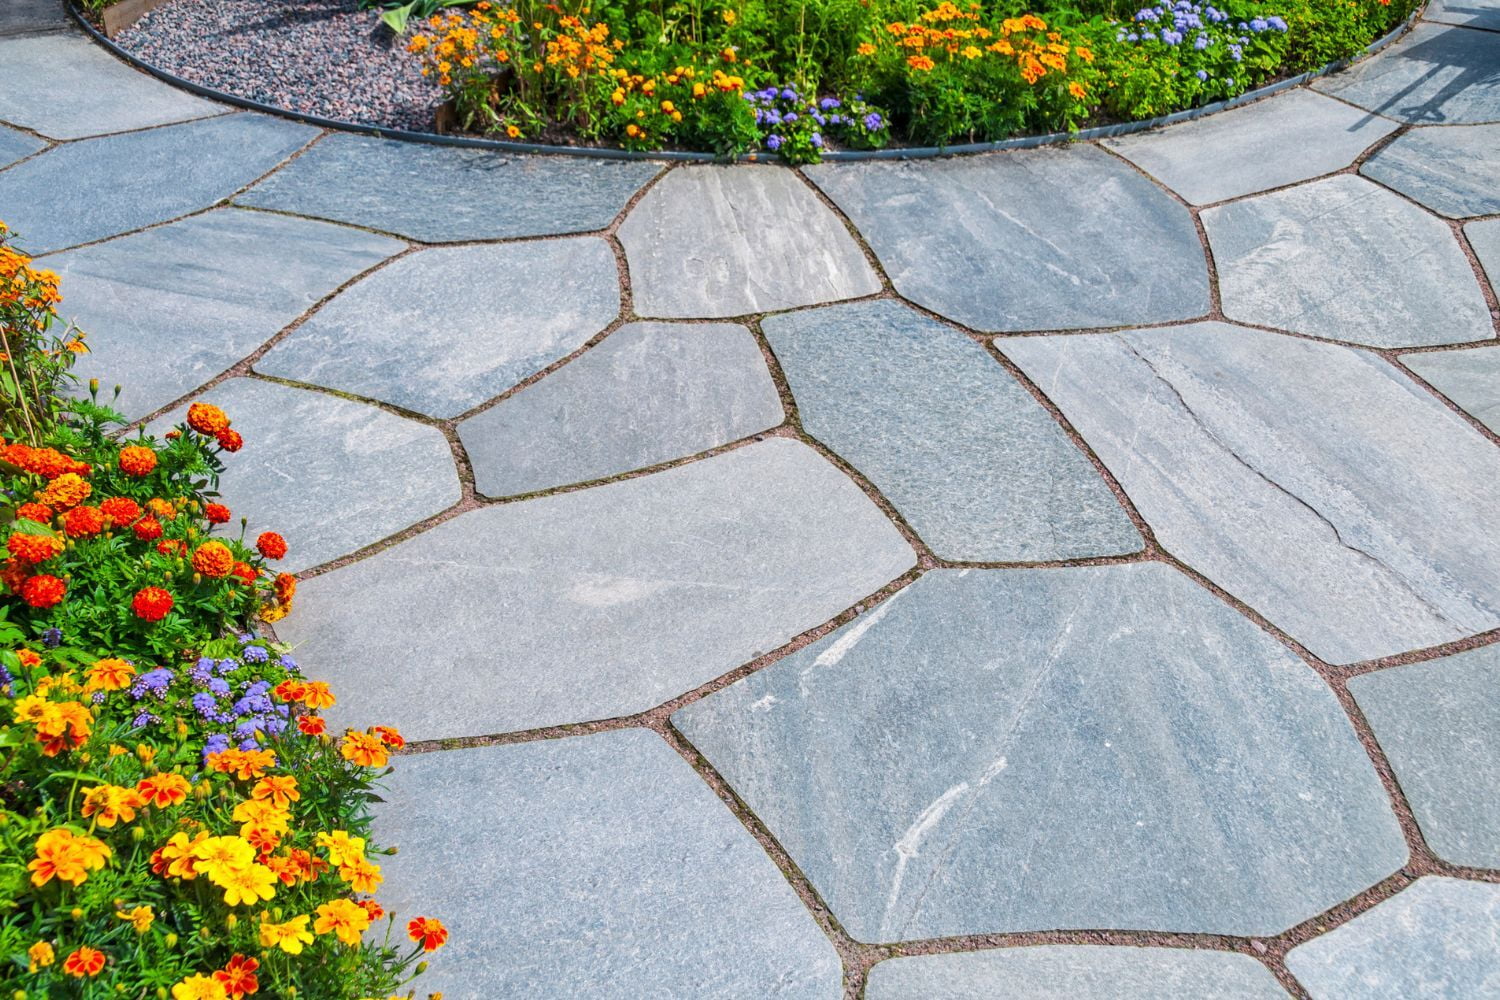 Get the Comprehend Factors, Estimates, and Benefits of Stamped Concrete Cost